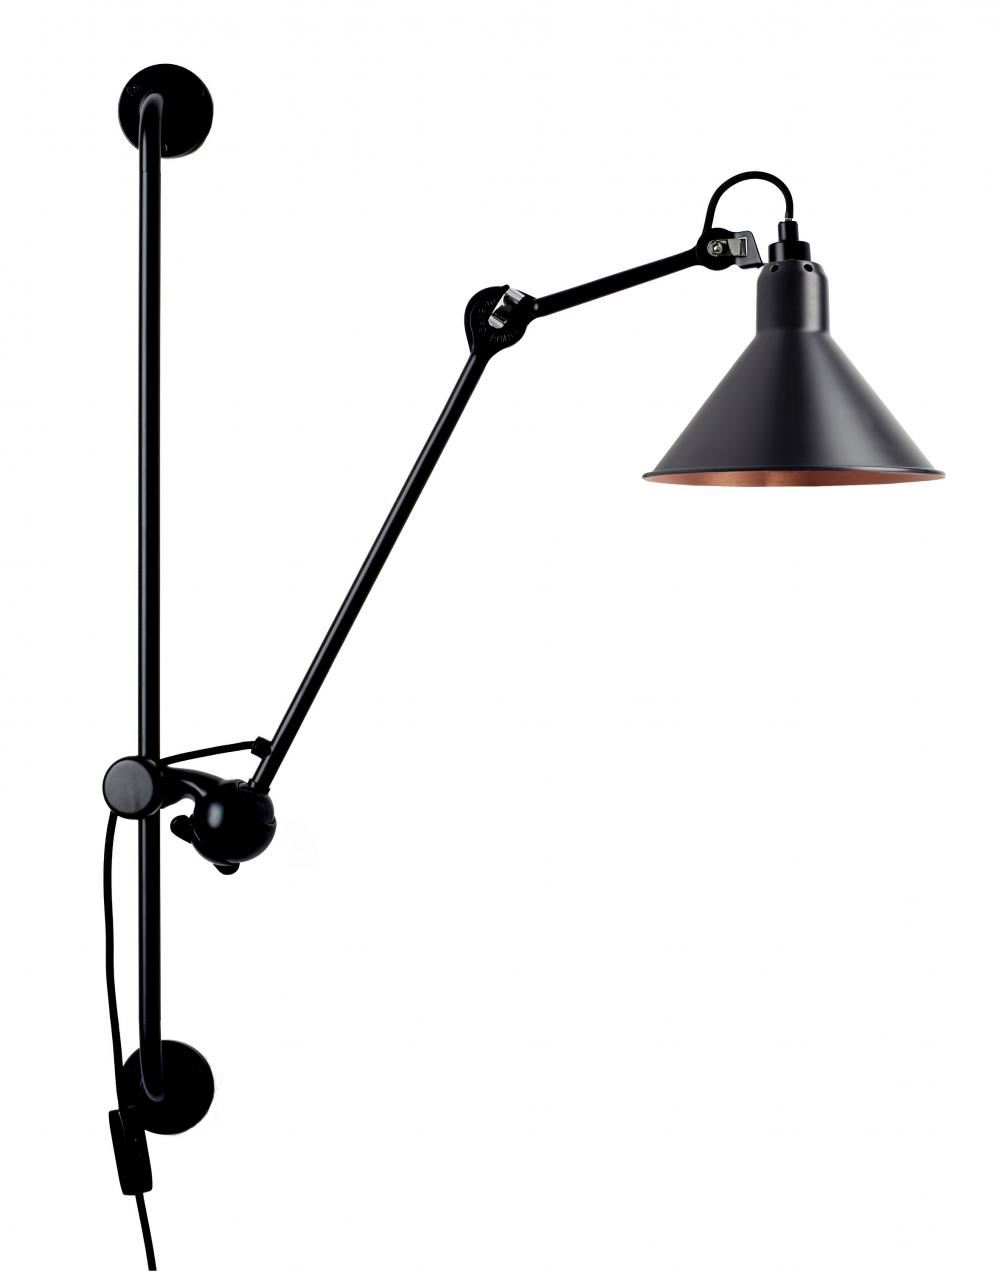 Lampe Gras 210 Wall Light Black Shade With Copper Interior Conic